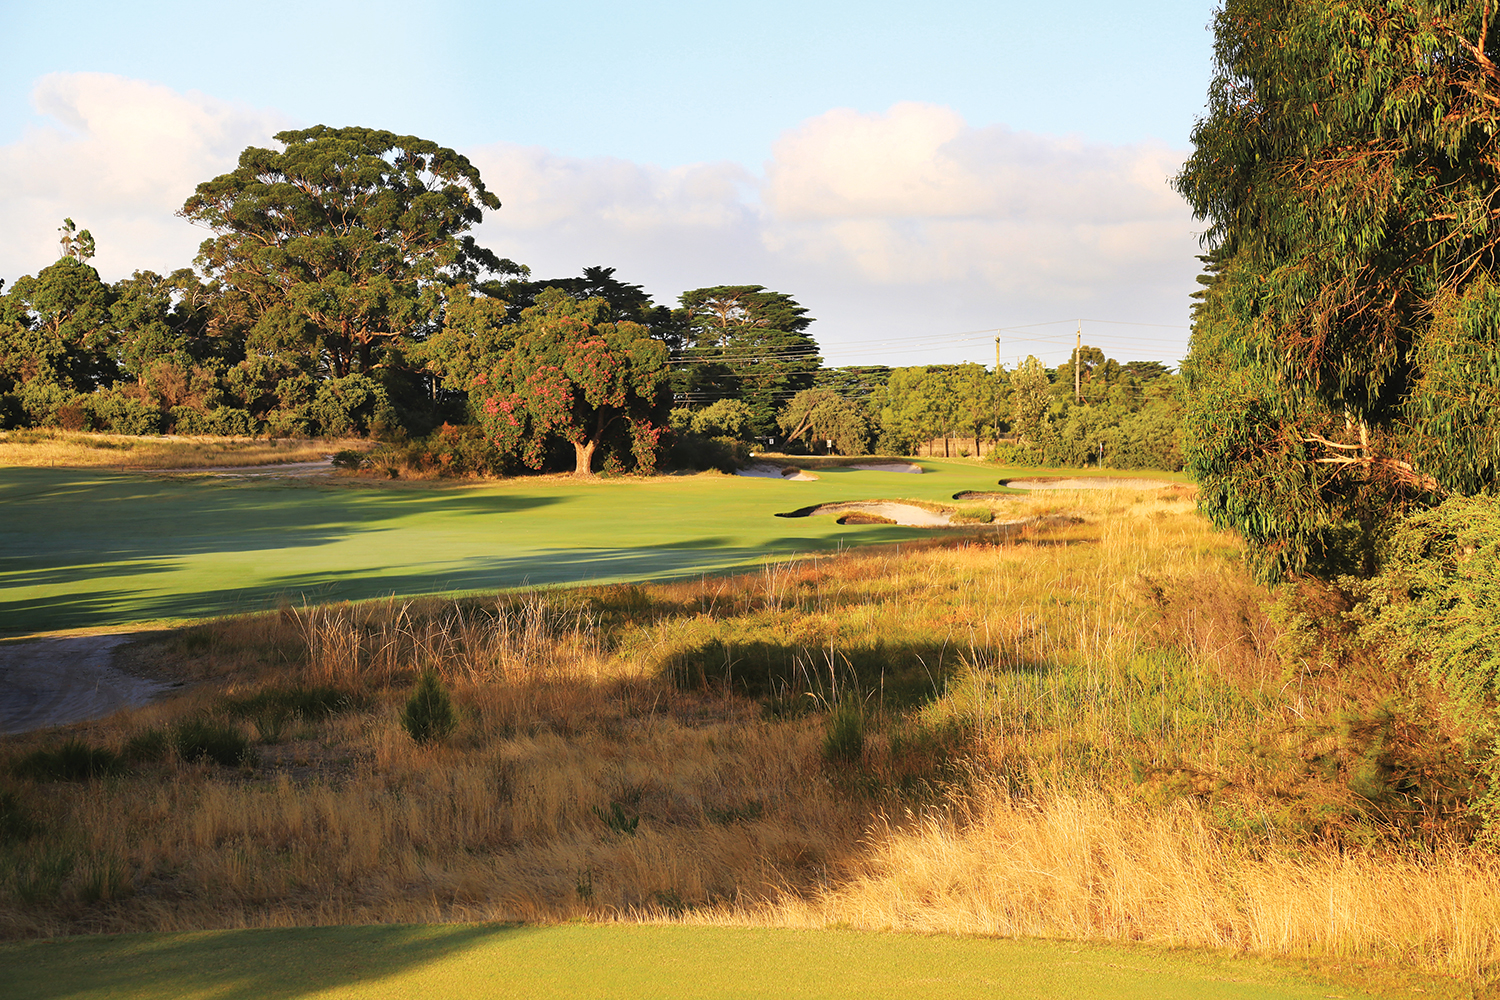 The East course at Royal Melbourne has lived somewhat in the shadow of its more famous sister.